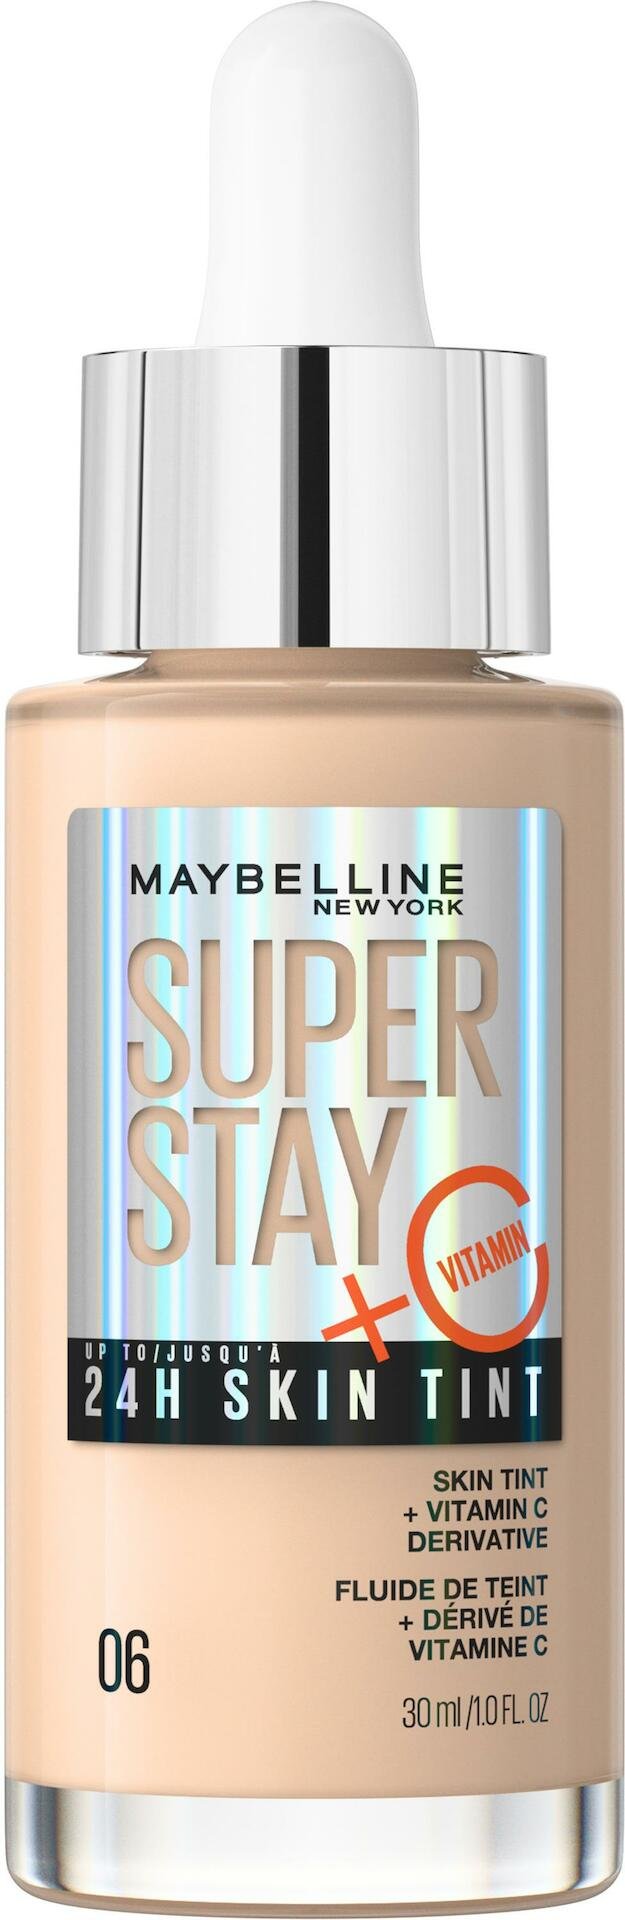 Maybelline New York Superstay 24H Skin Tint Foundation 06